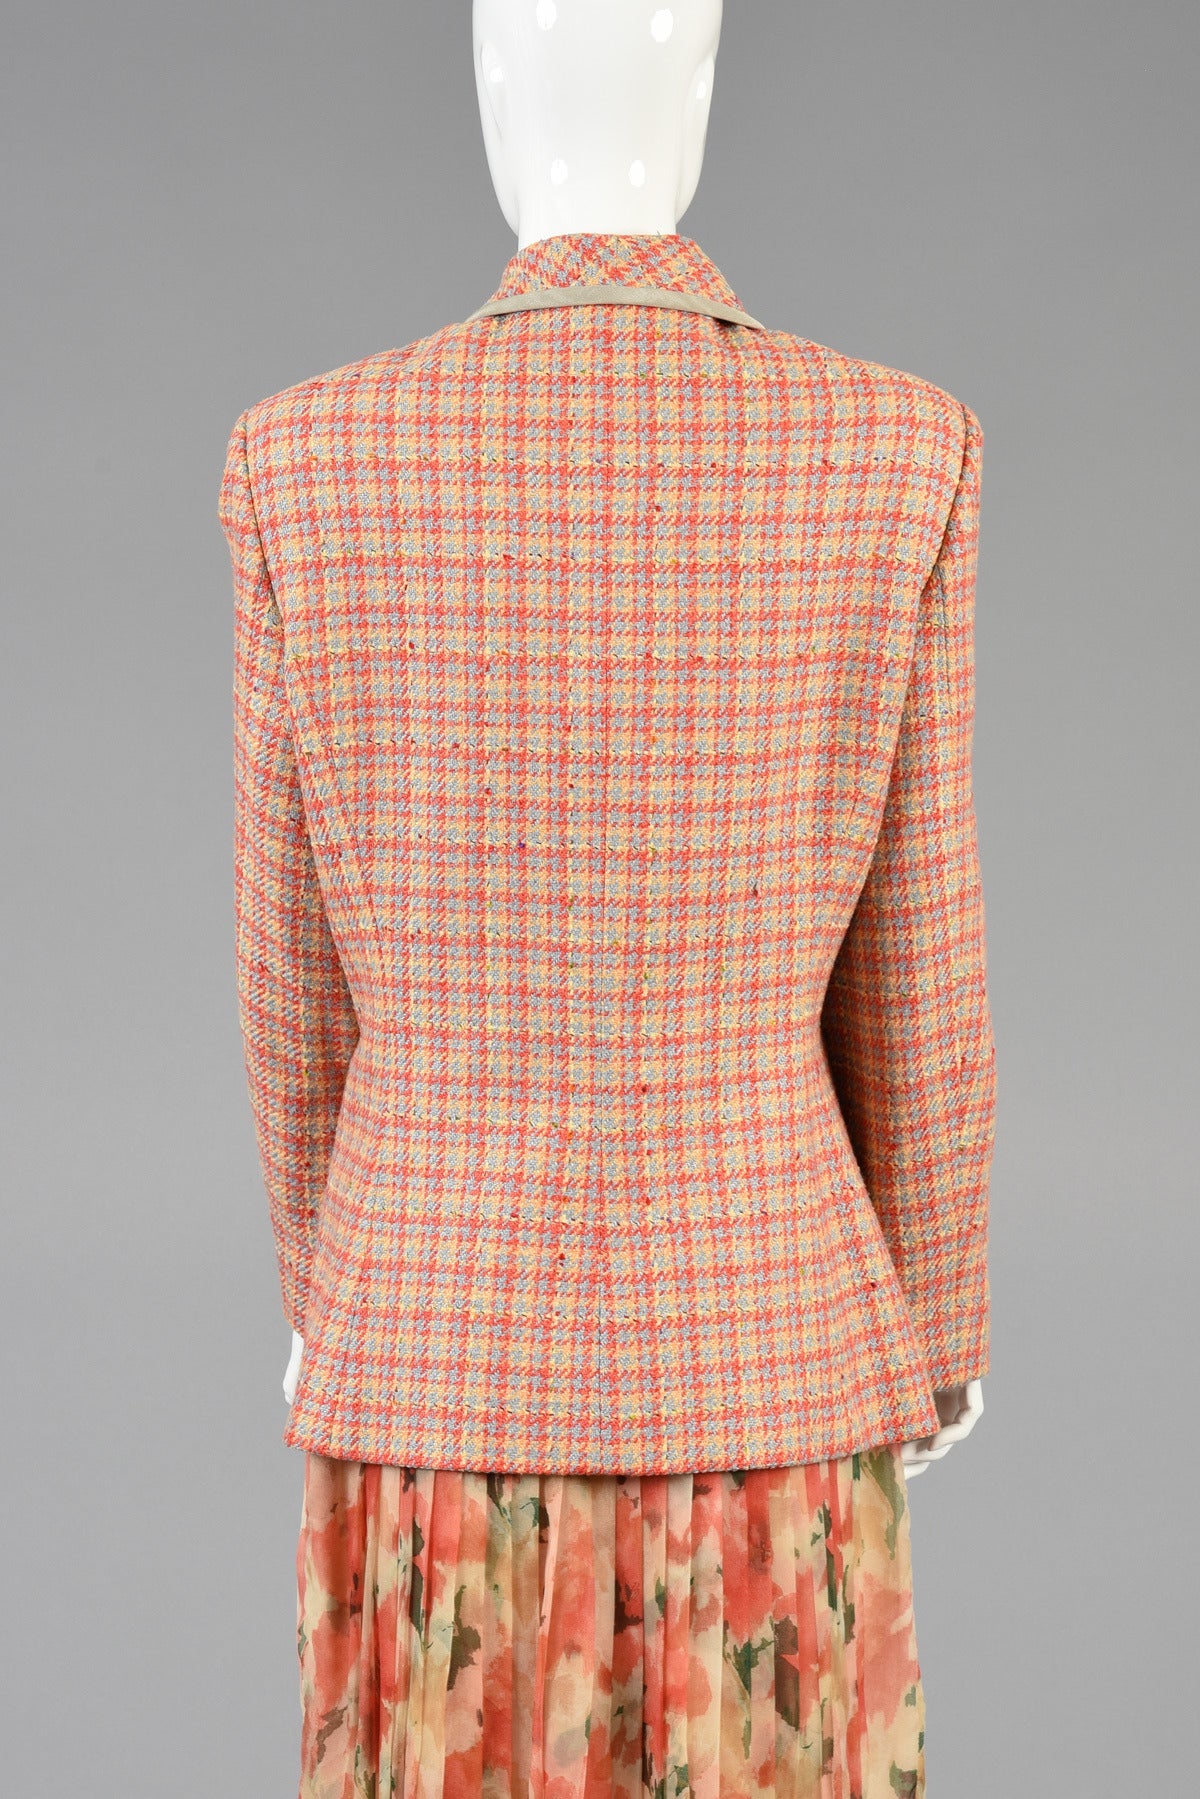 1990's Christian Dior Houndstooth Plaid Jacket For Sale 3